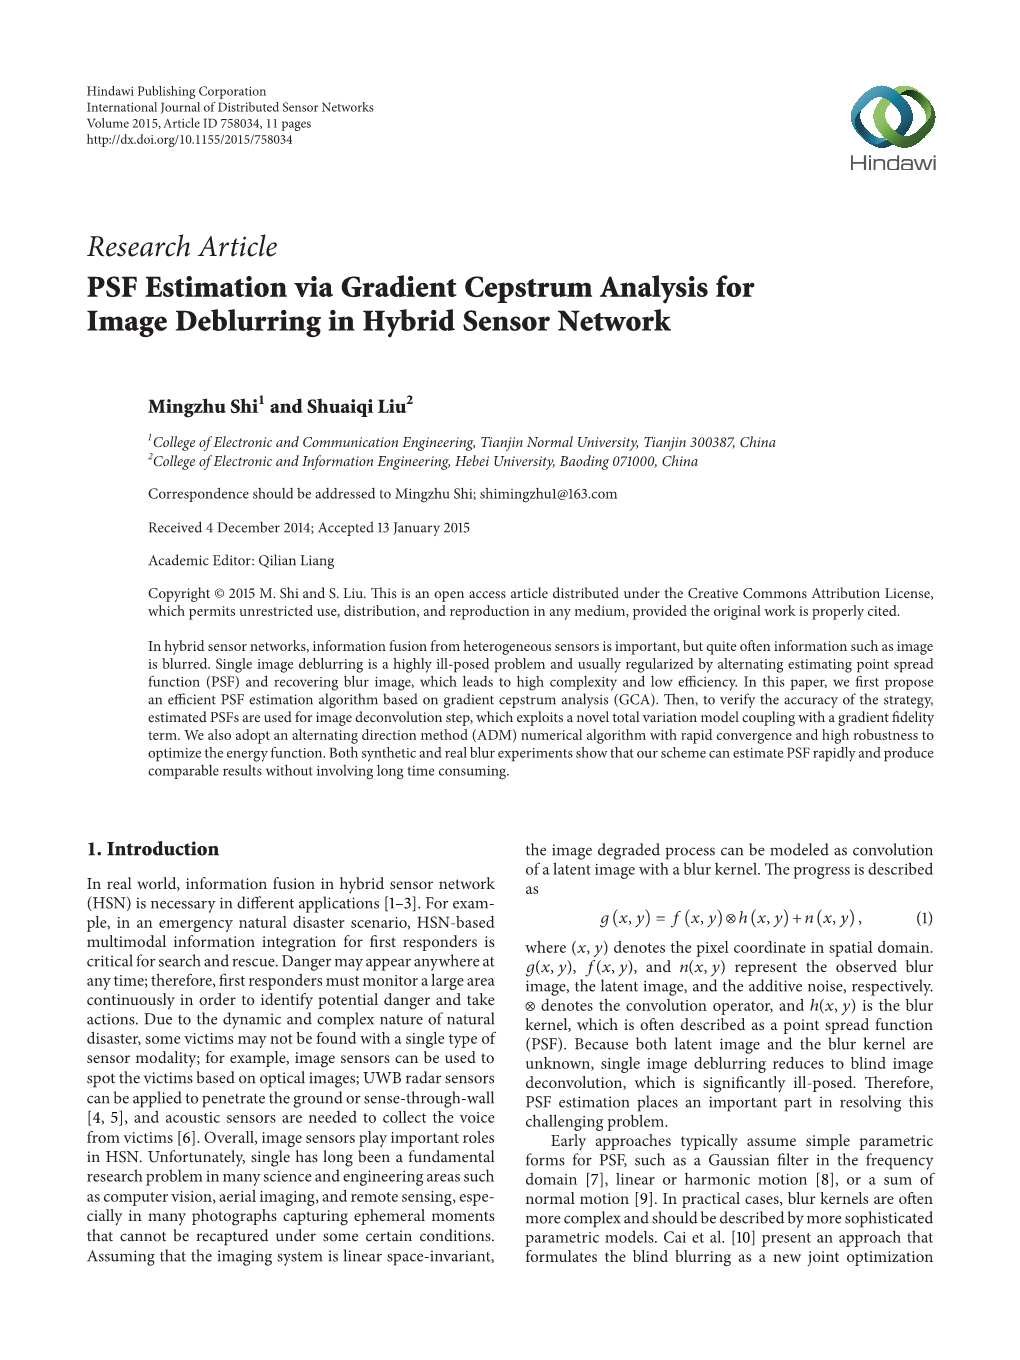 Research Article PSF Estimation Via Gradient Cepstrum Analysis for Image Deblurring in Hybrid Sensor Network